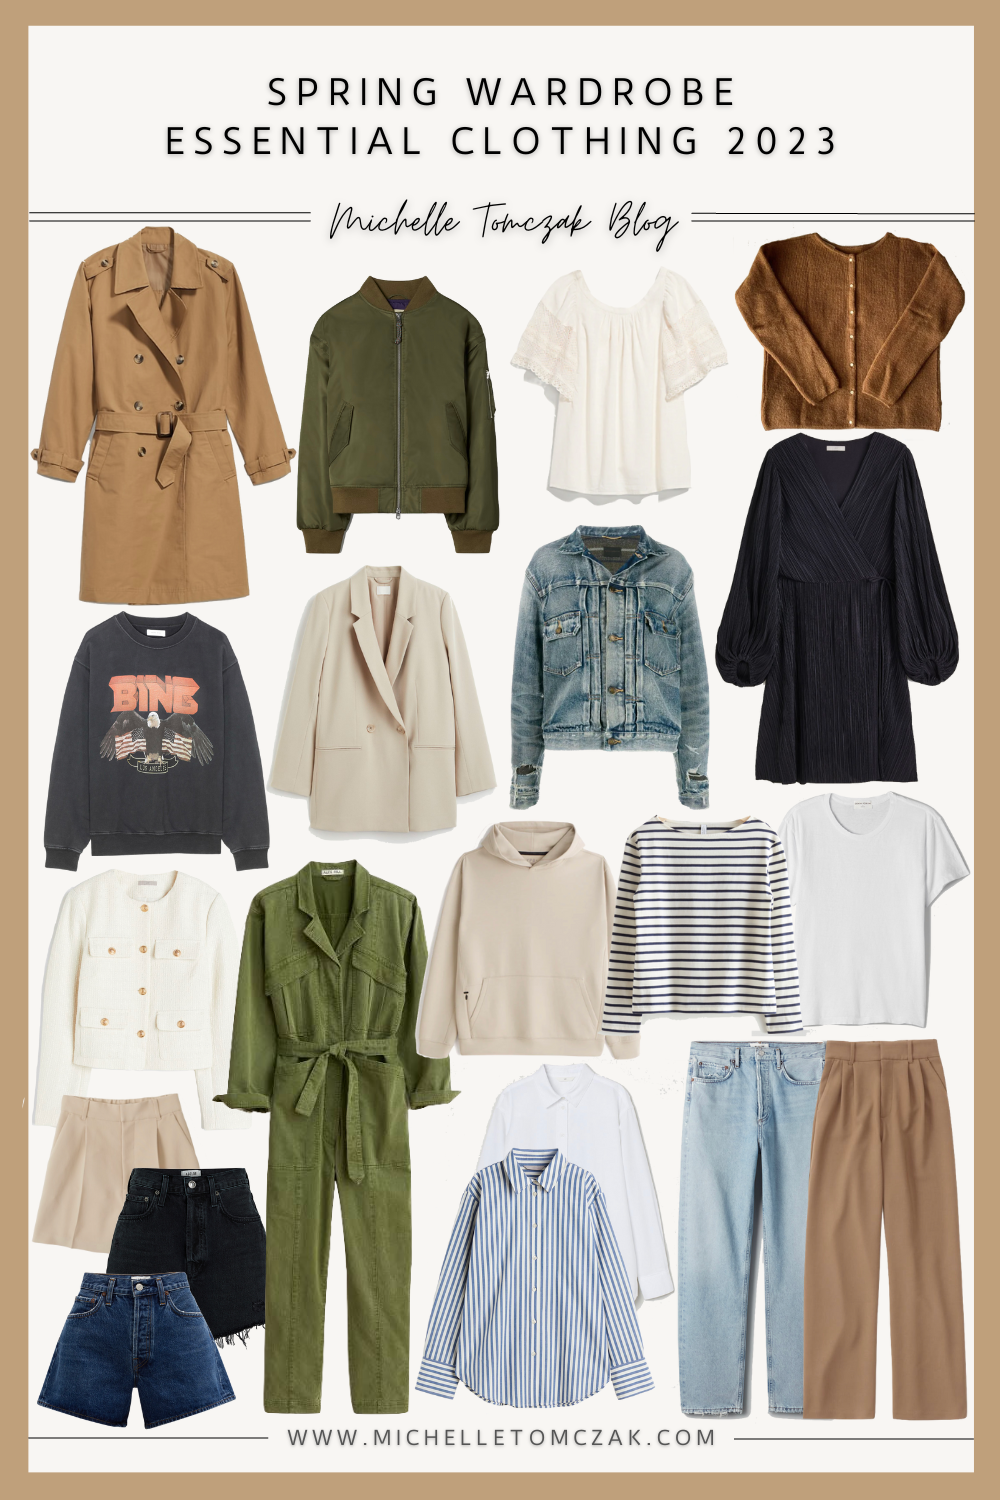 February  Fashion Finds: Closet Staples and Transitional Pieces